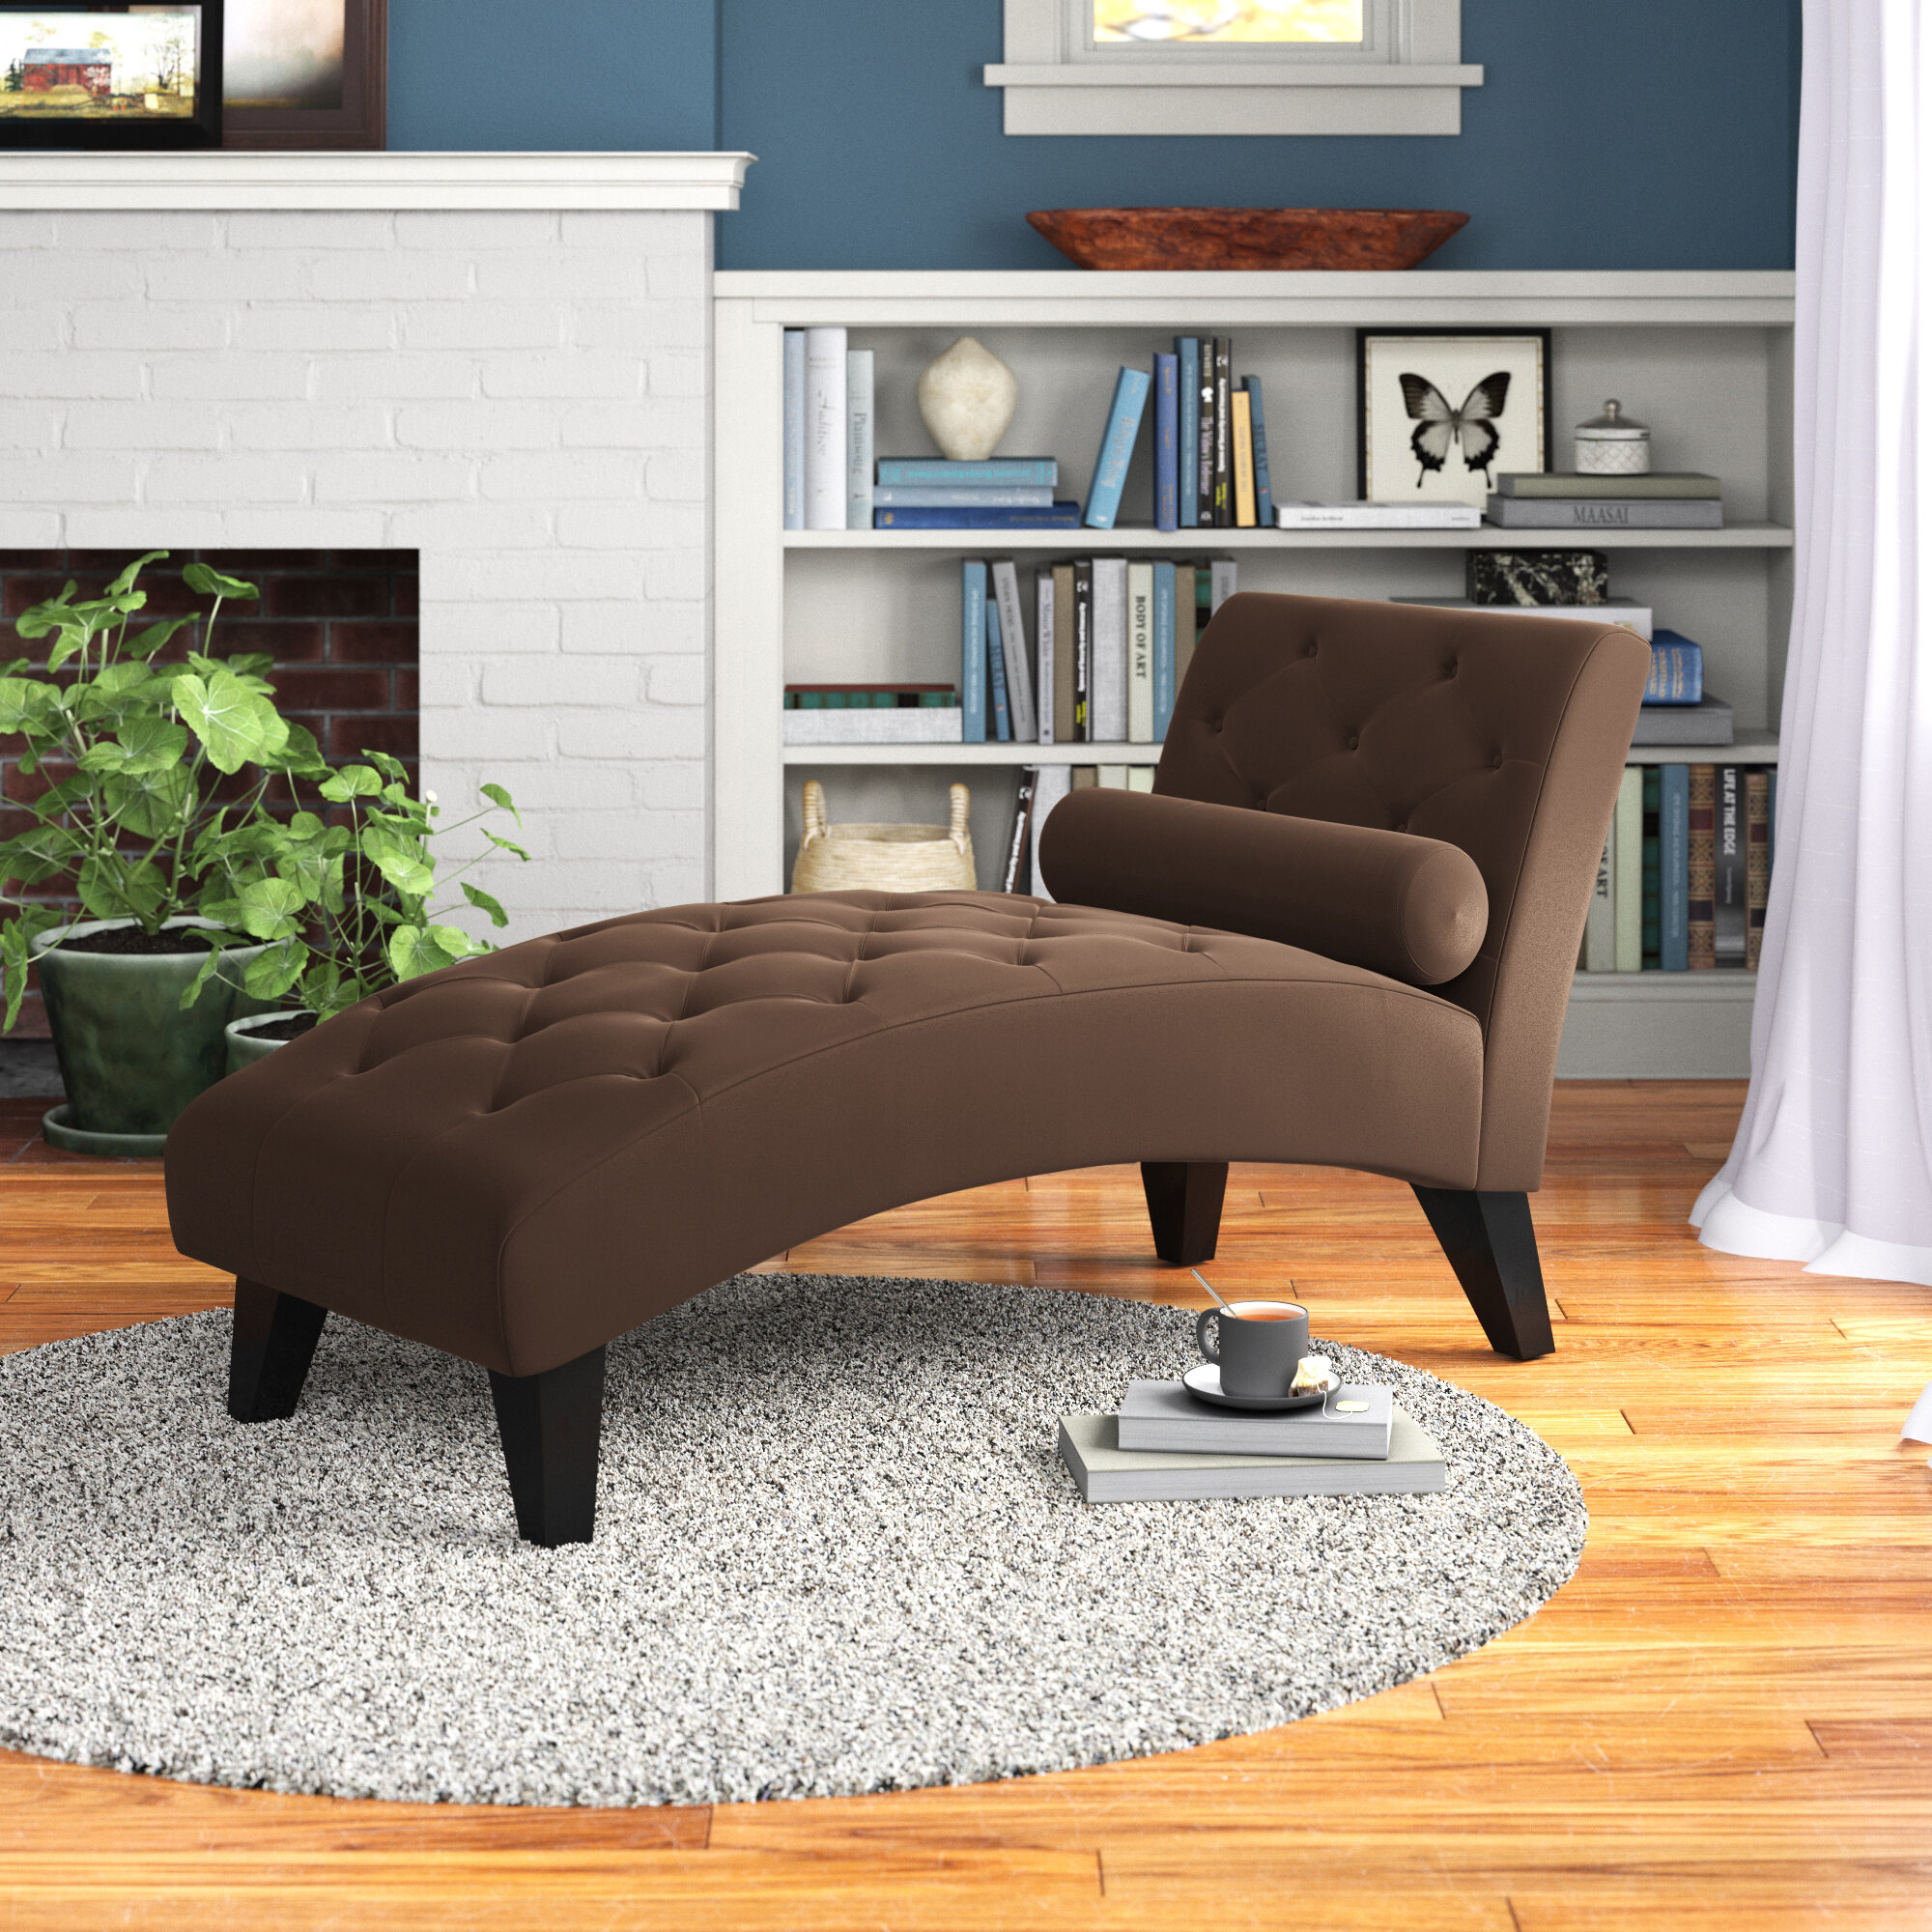 Mcfarland Upholstered Chaise Lounge